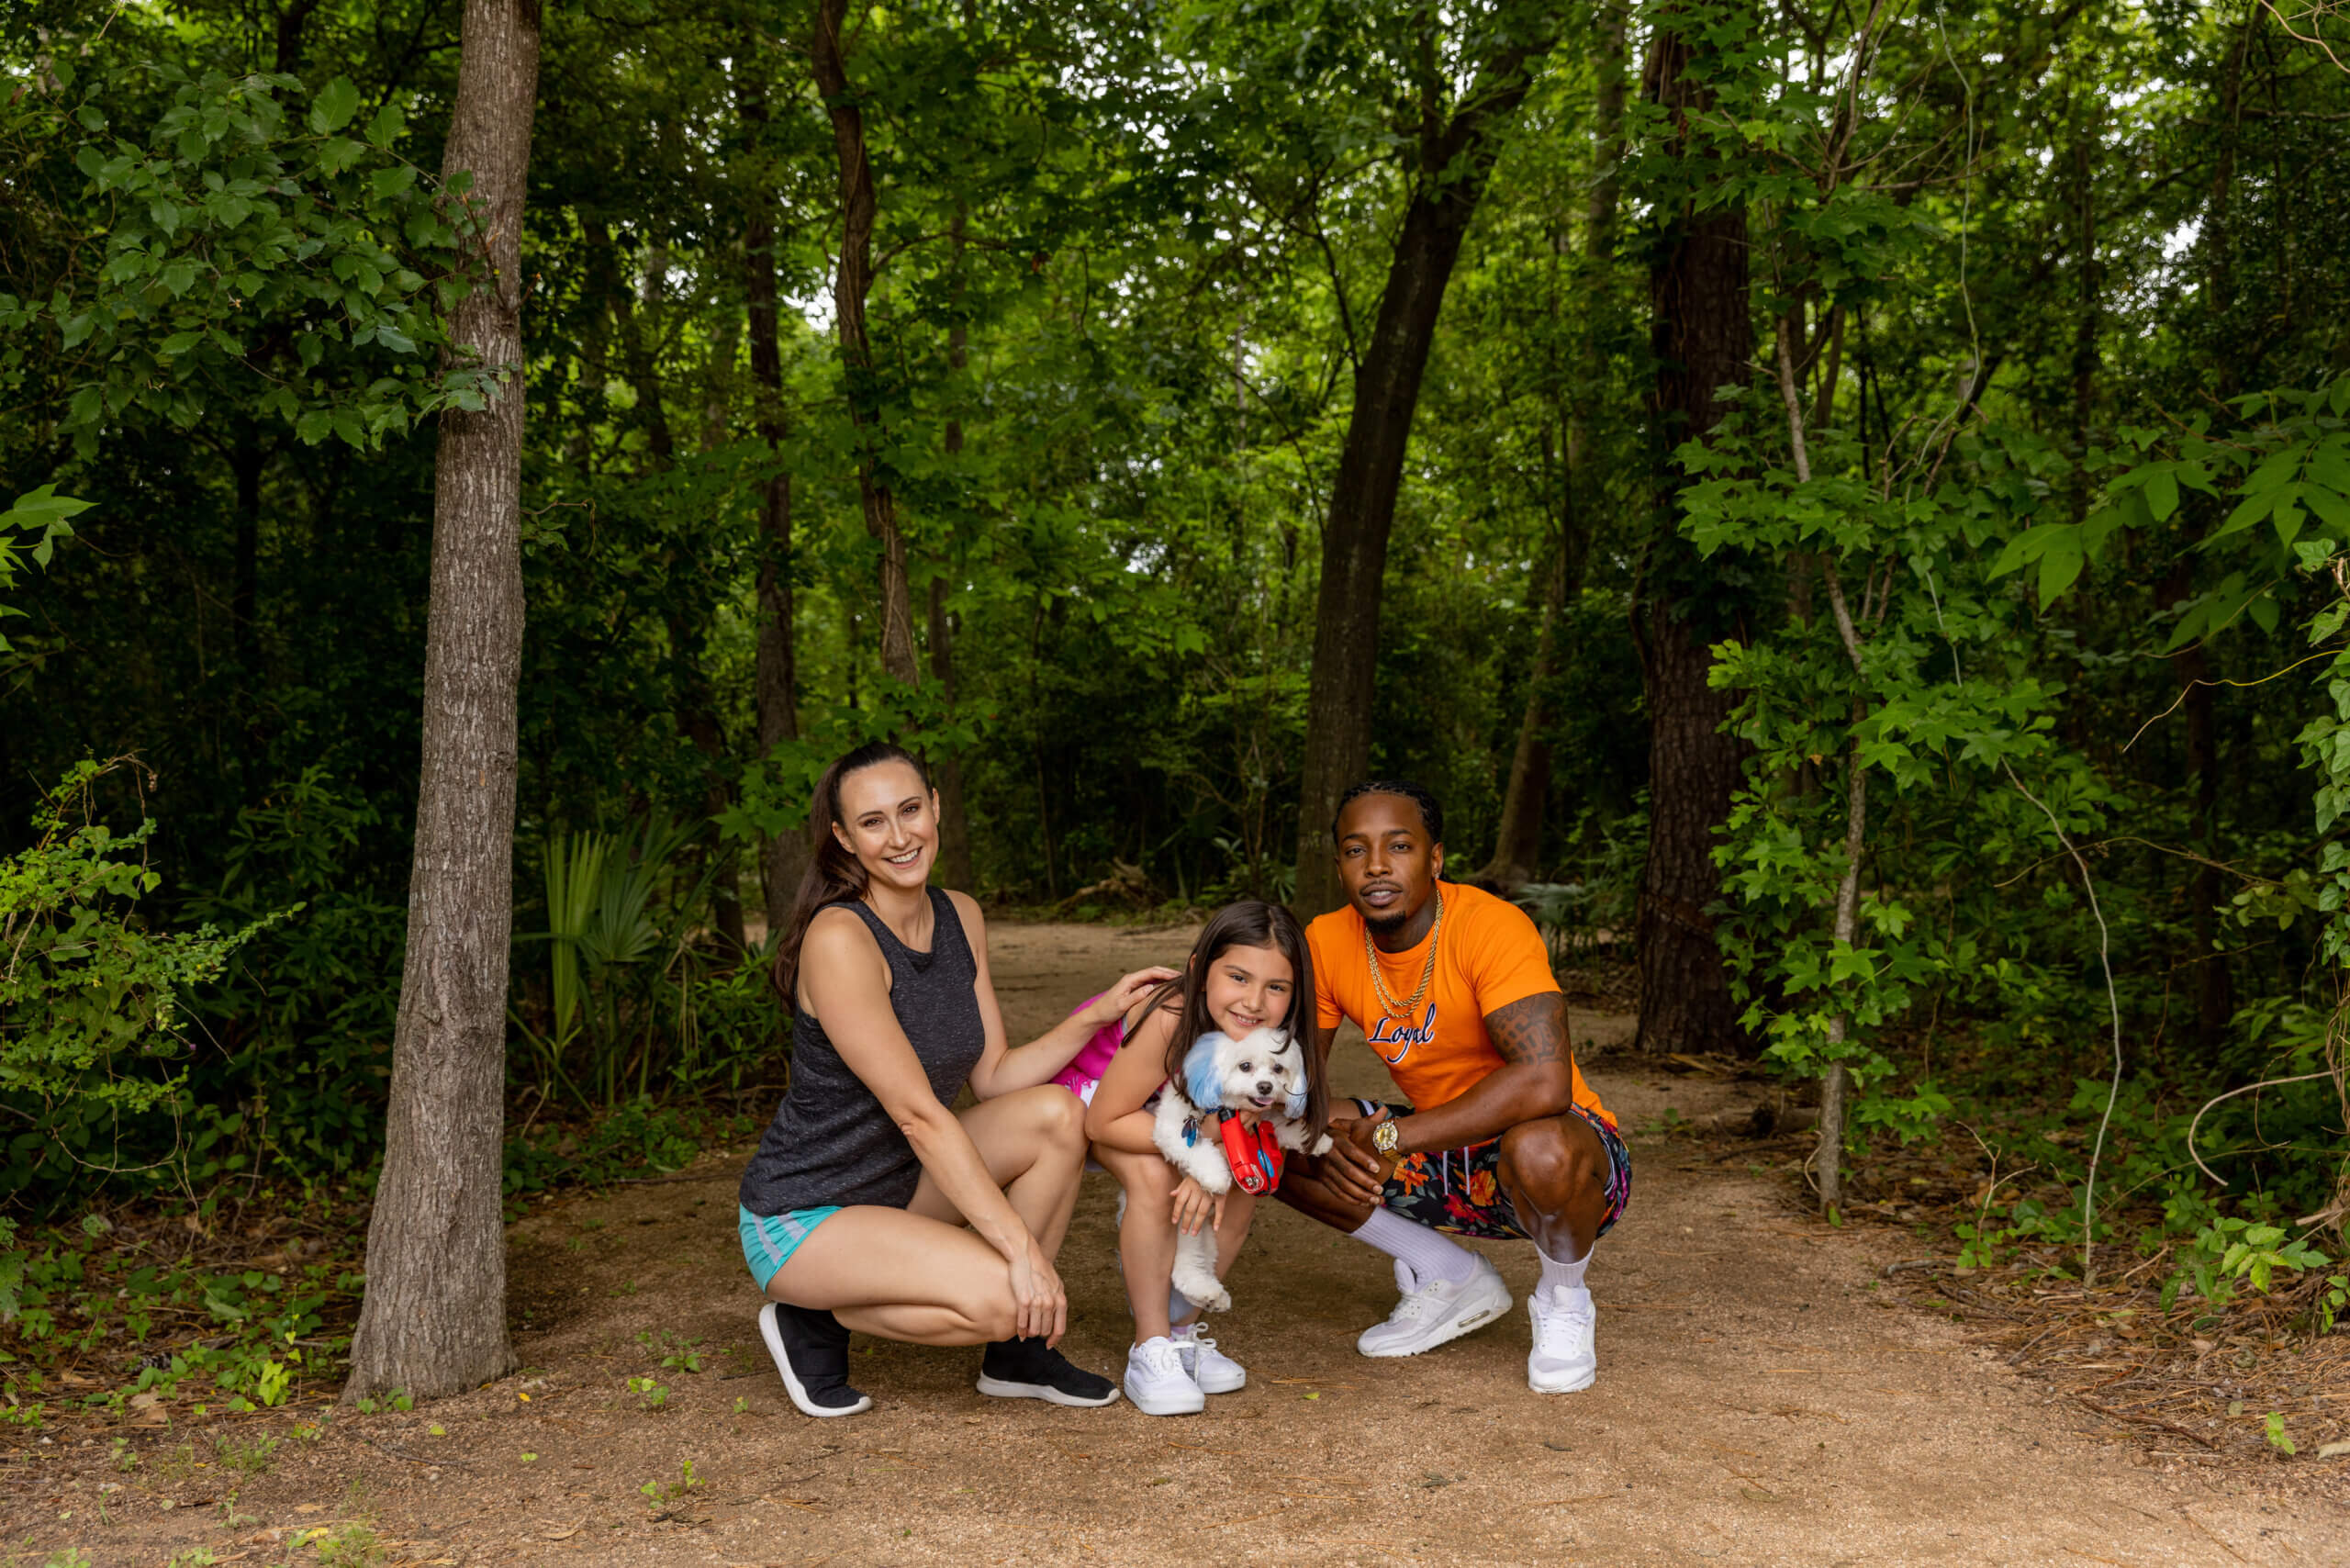 Family at the park! Mom is on the left kneeling down, daughter is in the middle holding a cute small dog and dad is on the right smiling on a manicured trail with woods in the background.